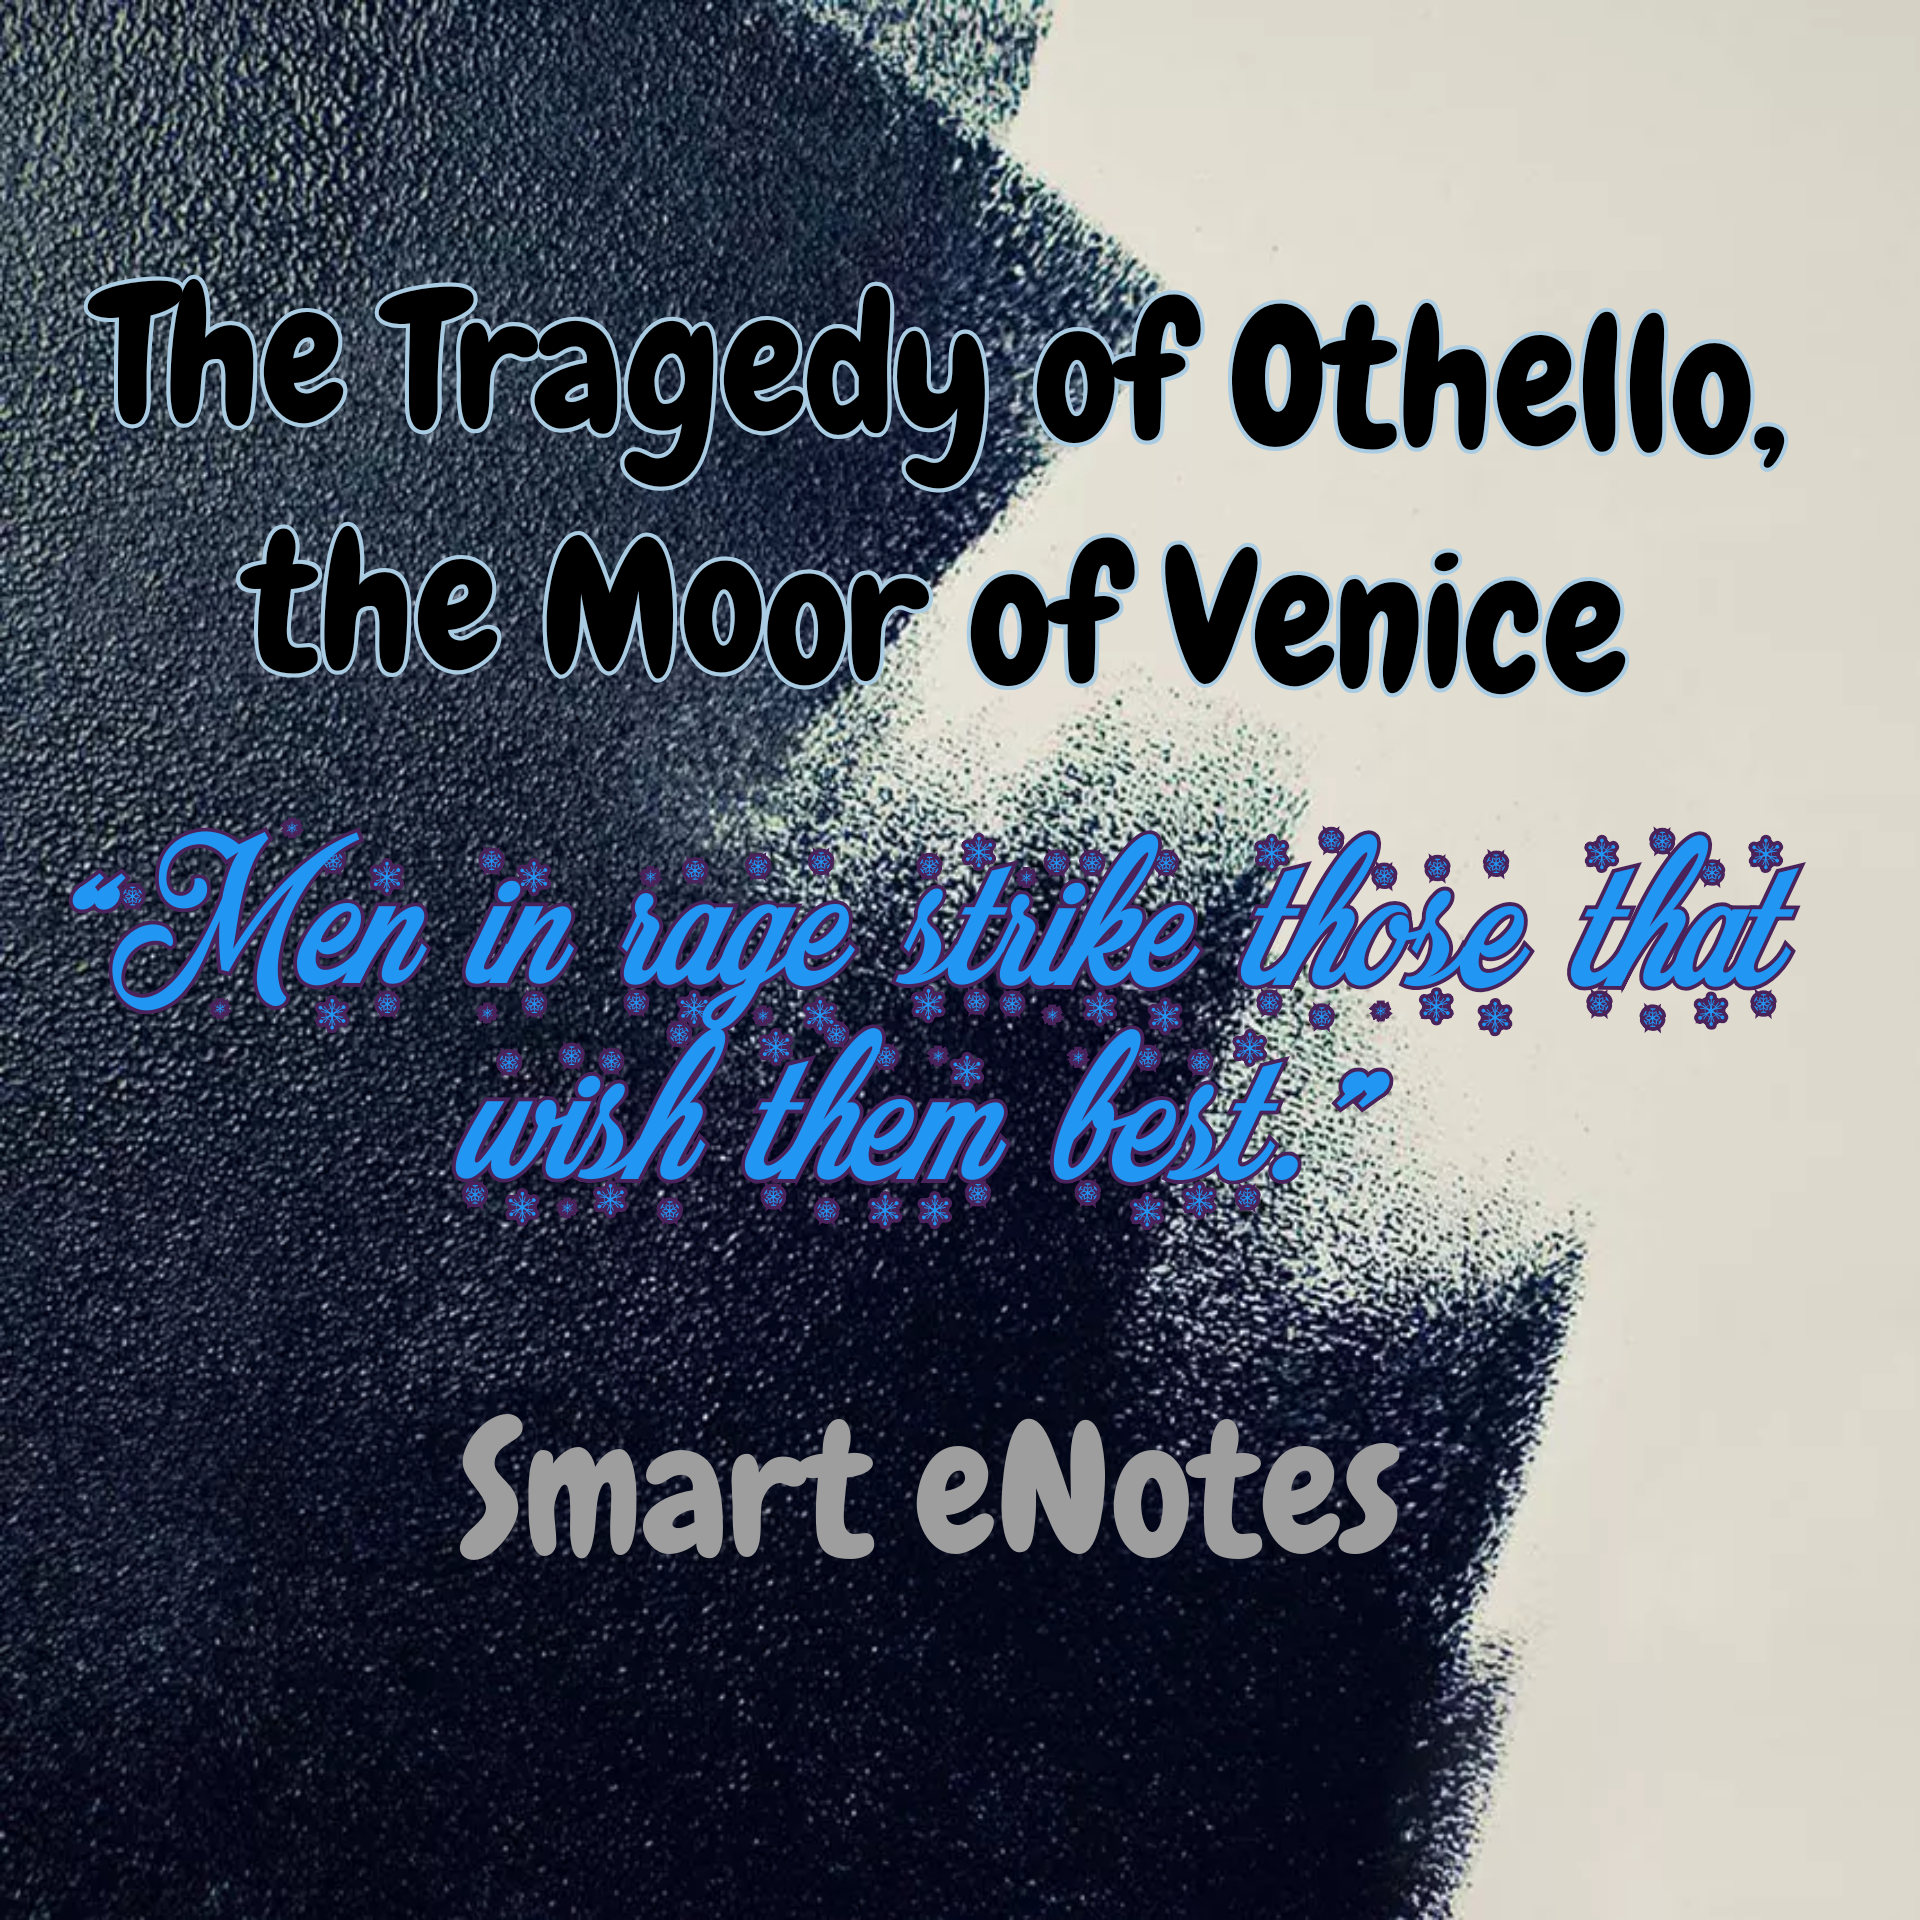 Critical Analysis of The Tragedy Of Othello 1